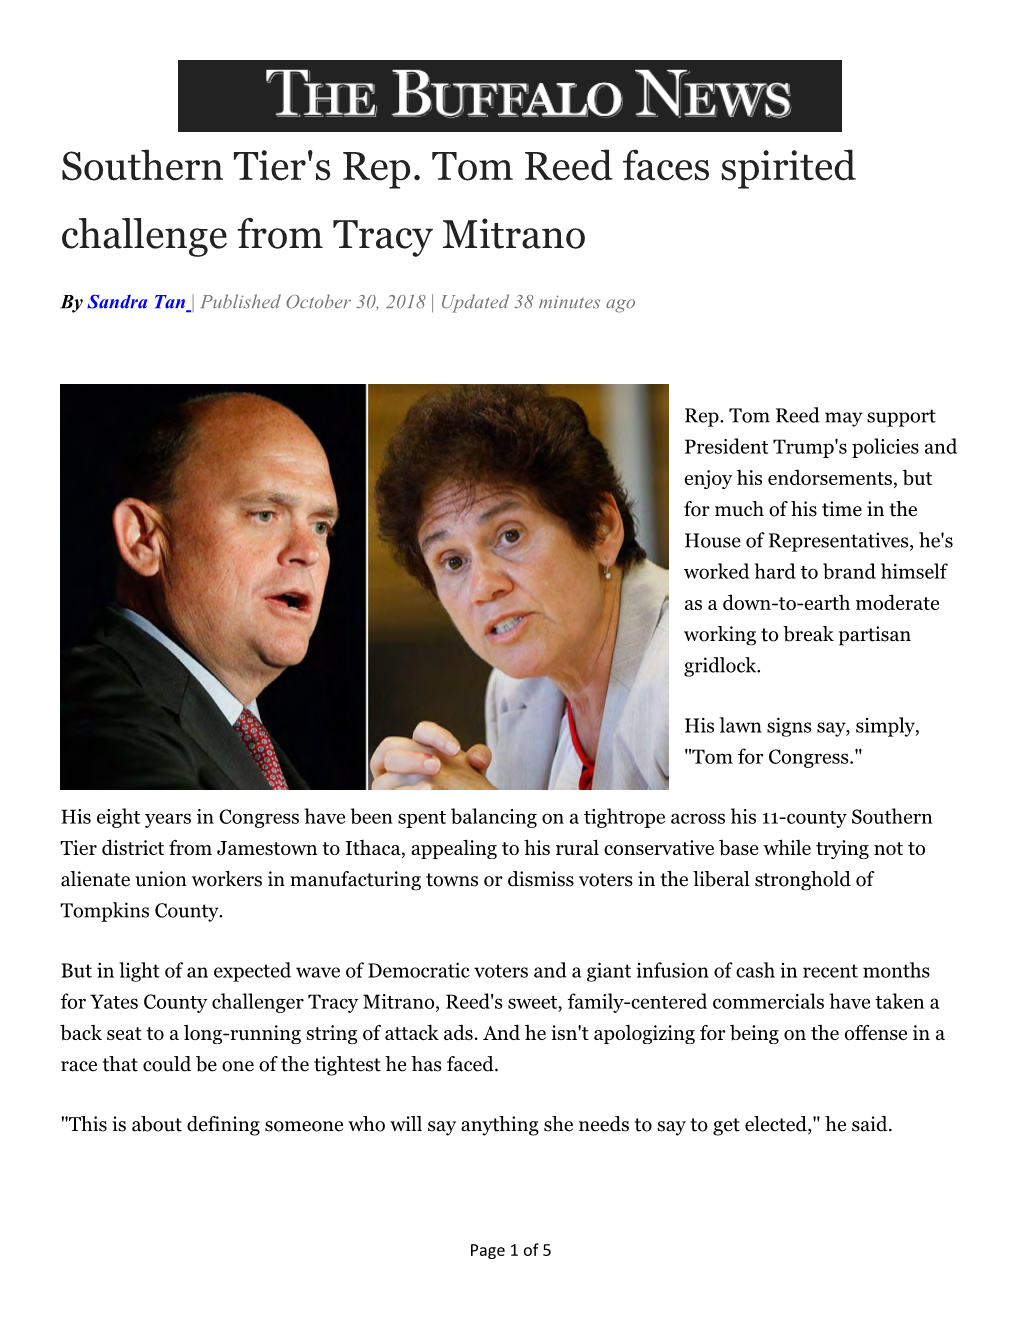 Southern Tier's Rep. Tom Reed Faces Spirited Challenge from Tracy Mitrano